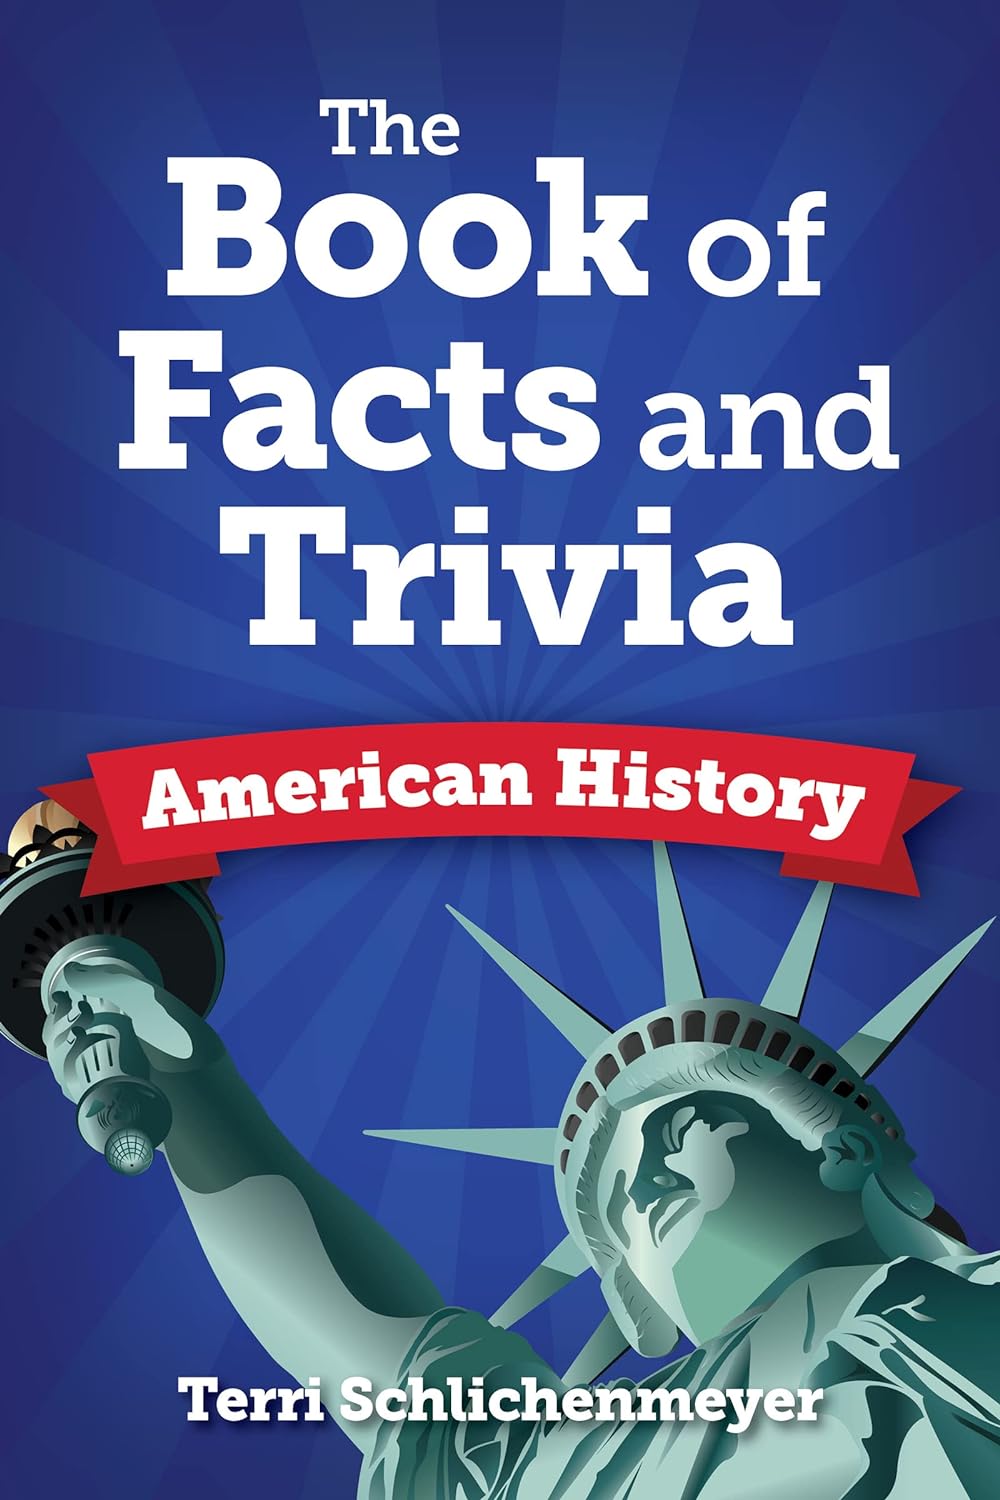 The Book of Facts and Trivia American History - PGW - SureShot Books Publishing LLC